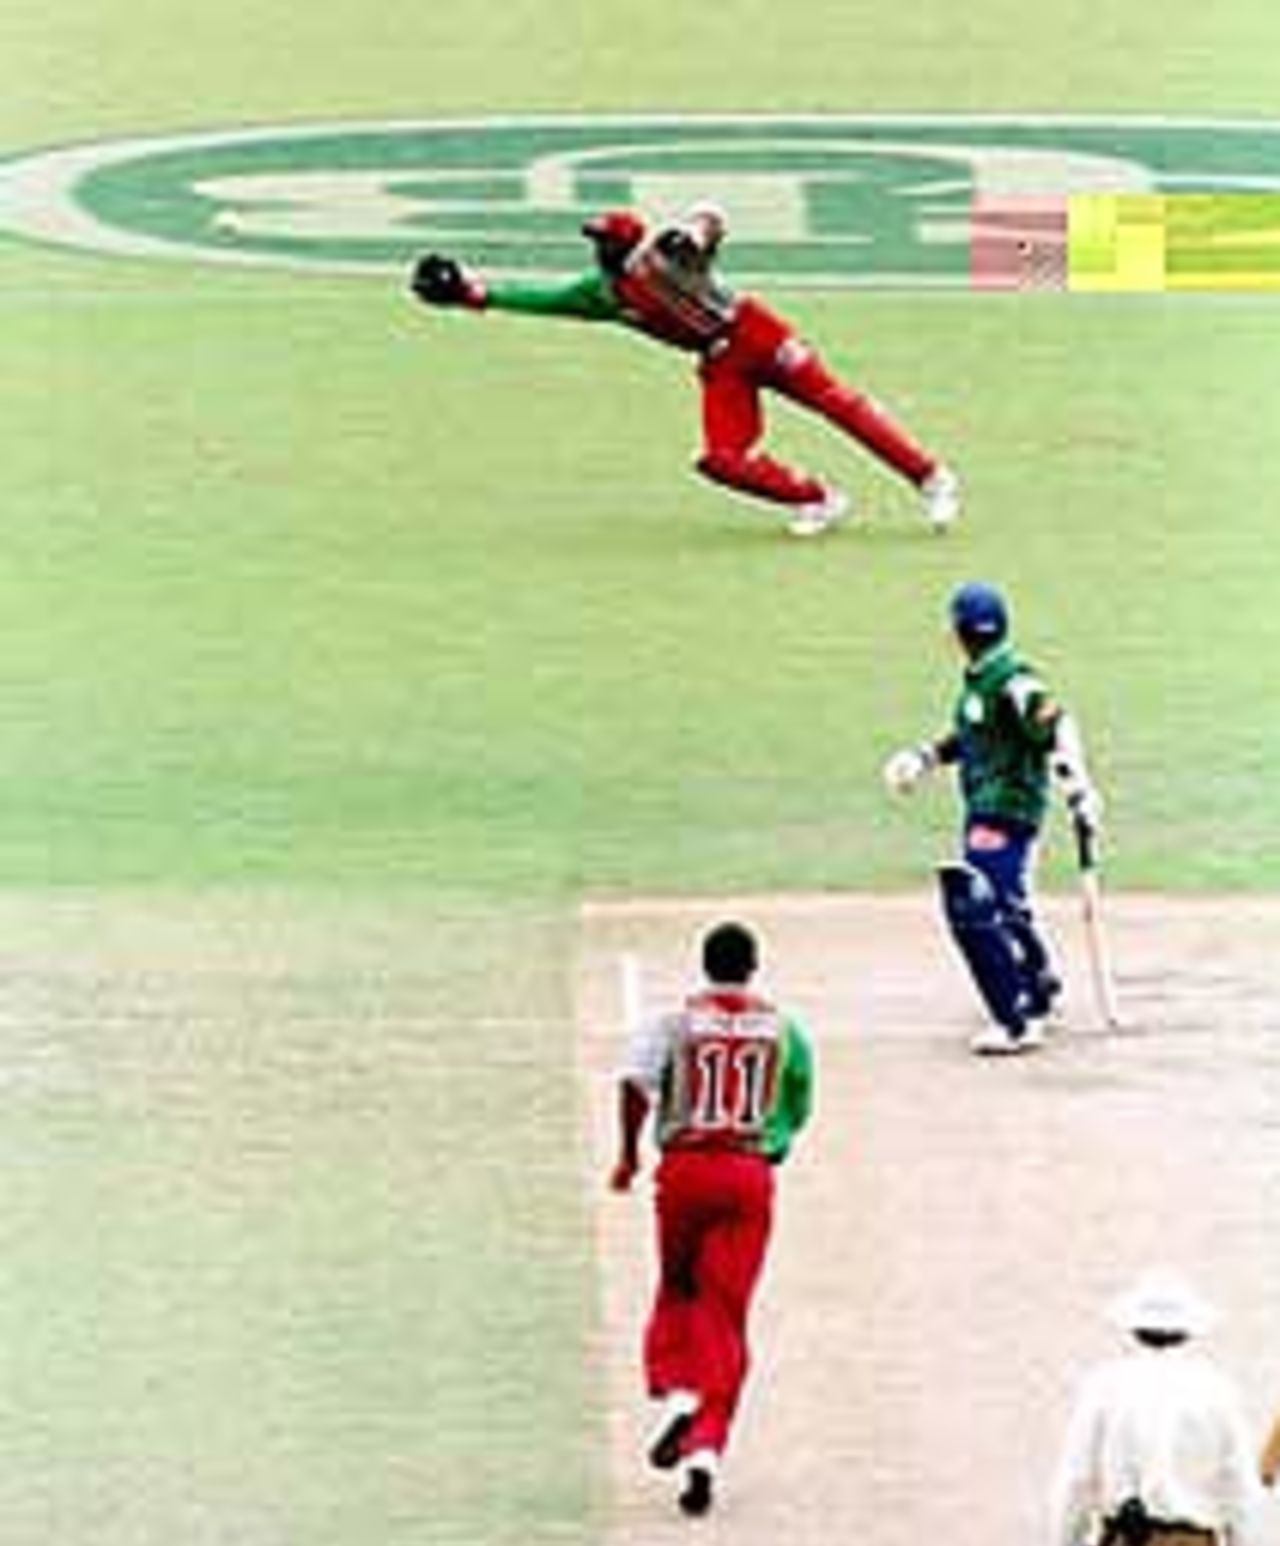 Pakistan v West Indies, Carlton and United Series, match 14, 17 December 1996, Adelaide